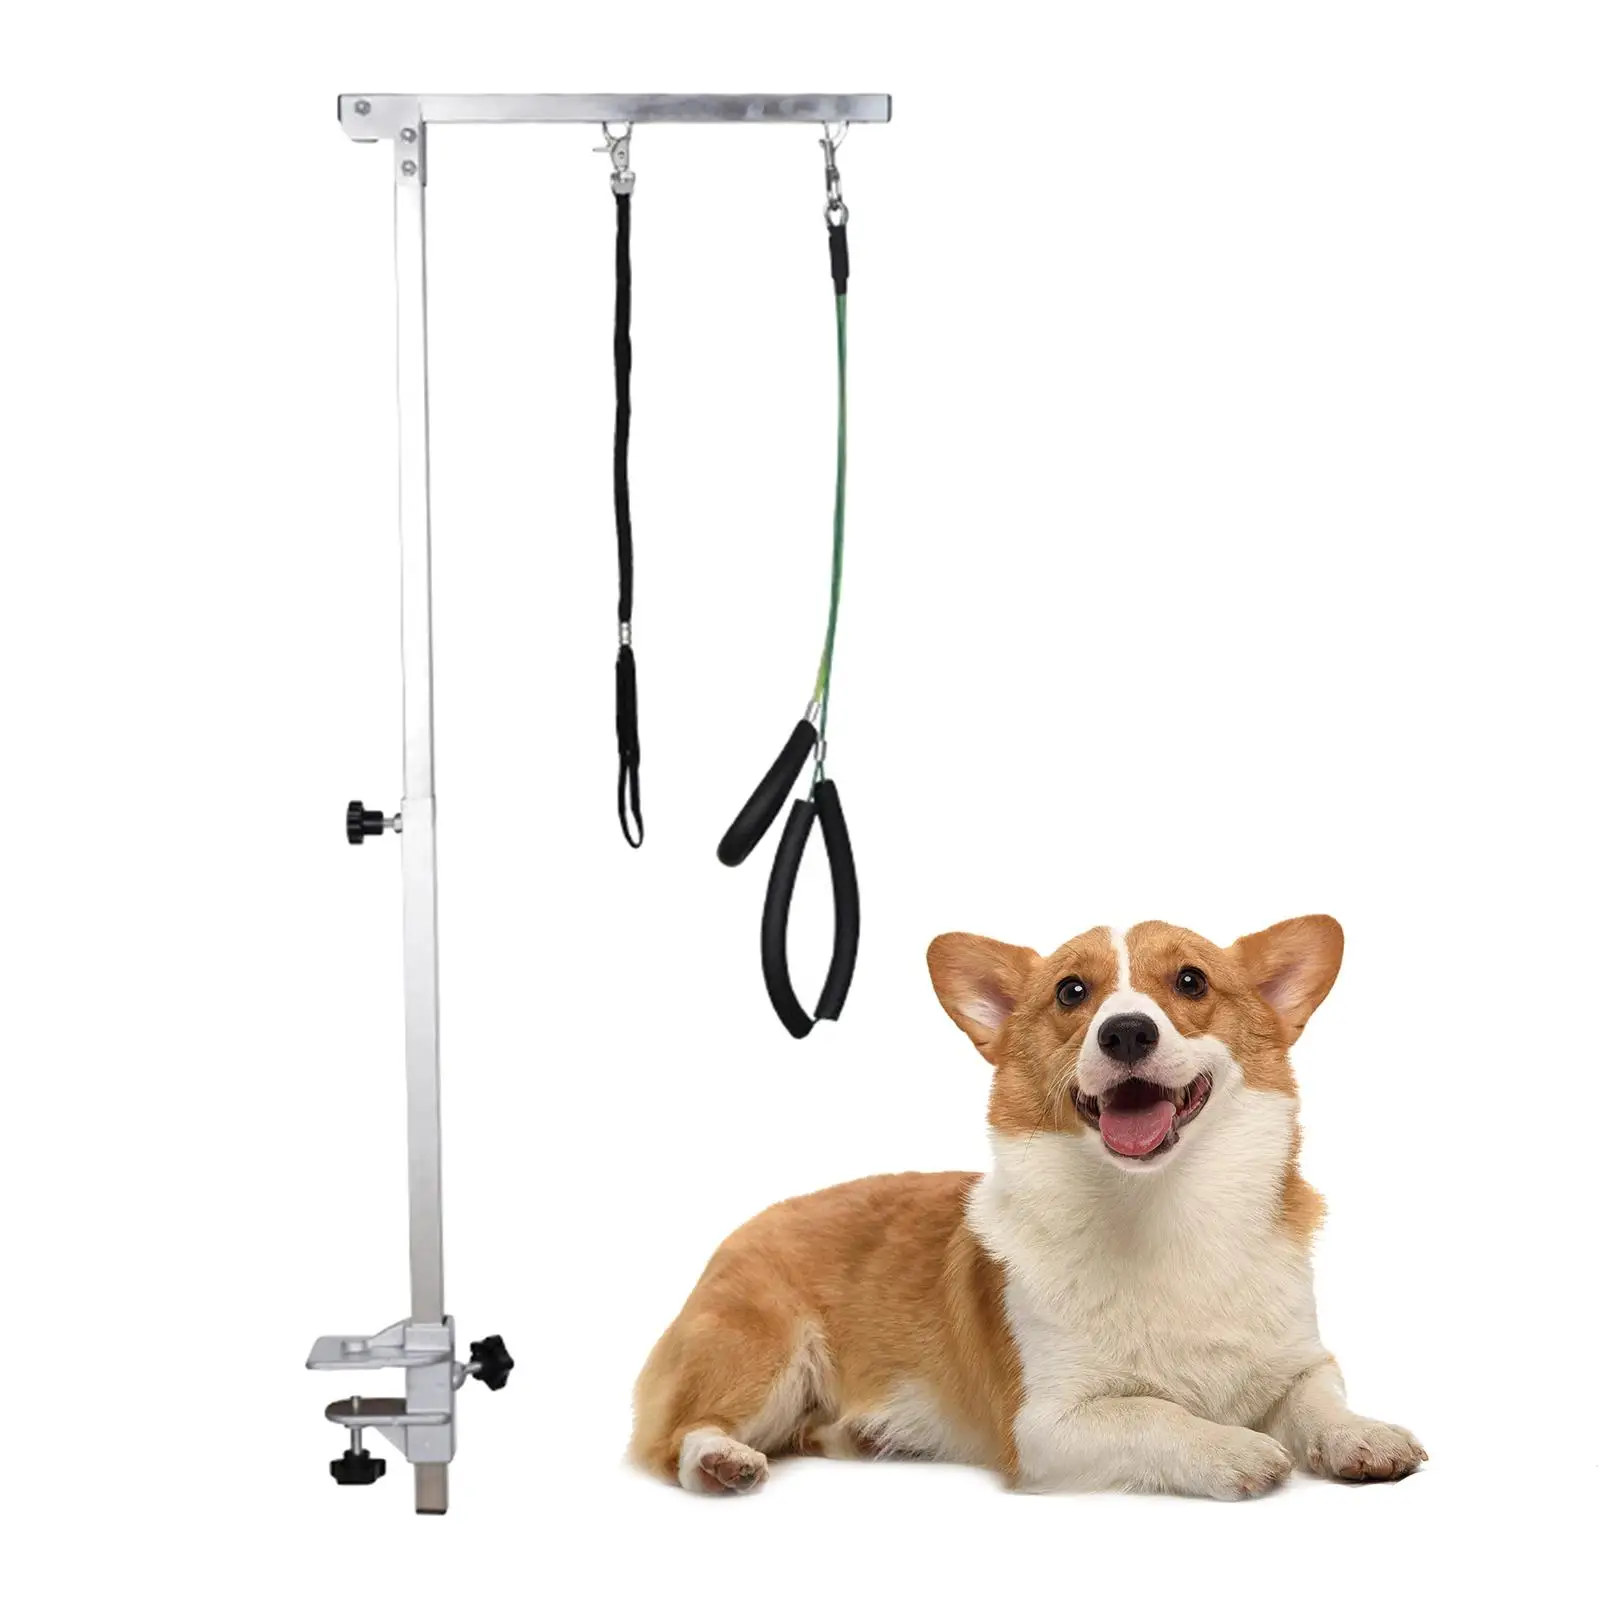 Pet Dog Grooming Arm Pet Grooming Arm Tool with Clamps Loop Noose Flexible Table Hanger Pet Grooming Arm with Clamp Professional